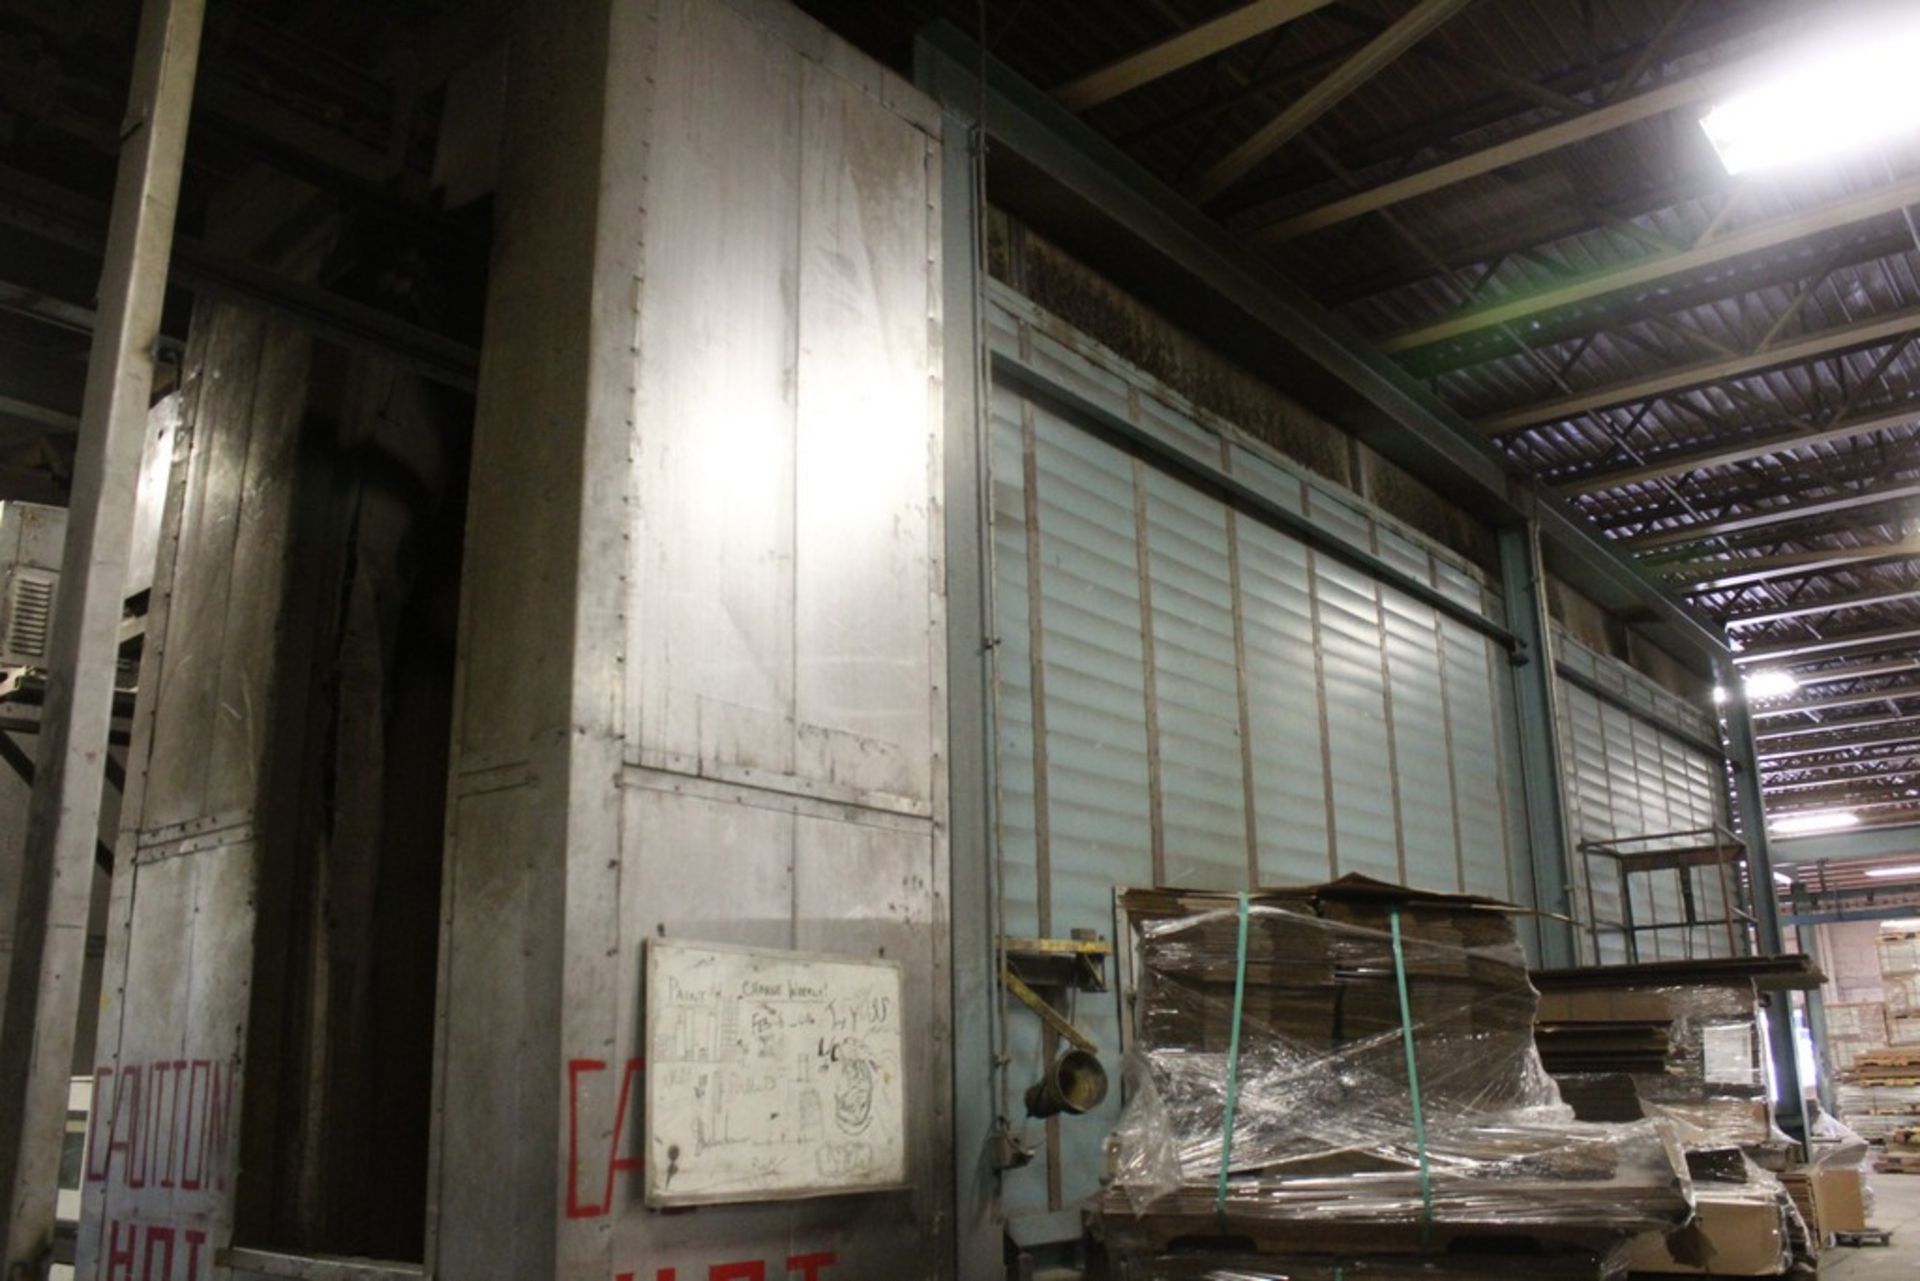 EISENMANN CONVECTION DRY-OFF OVEN, S/N A40-324-02 SALE OF THIS LOT IS SUBJECT TO BULK BID #2, IF THE - Image 5 of 7